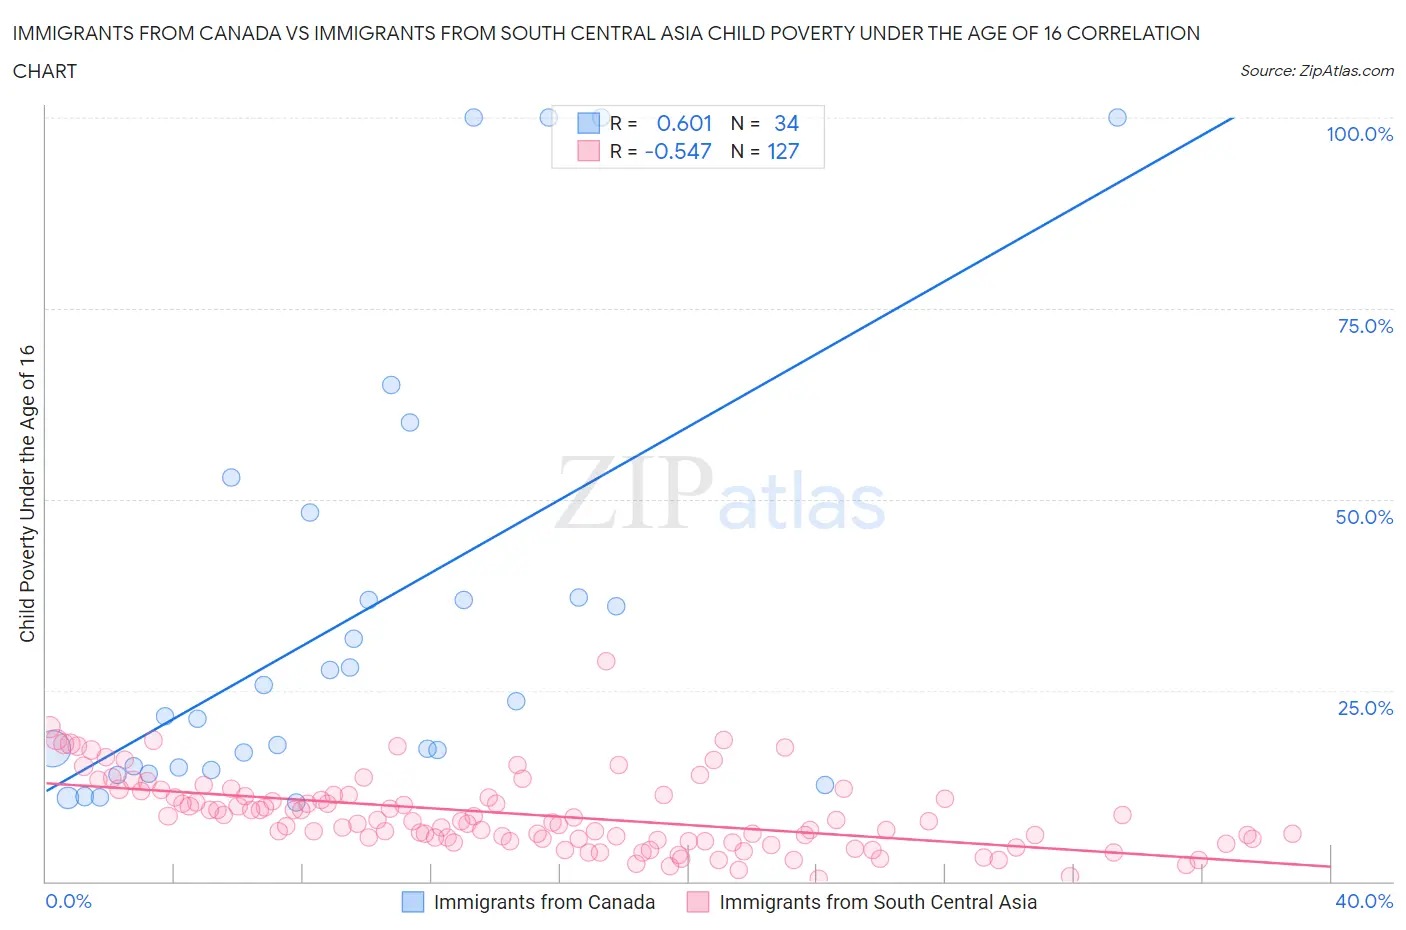 Immigrants from Canada vs Immigrants from South Central Asia Child Poverty Under the Age of 16